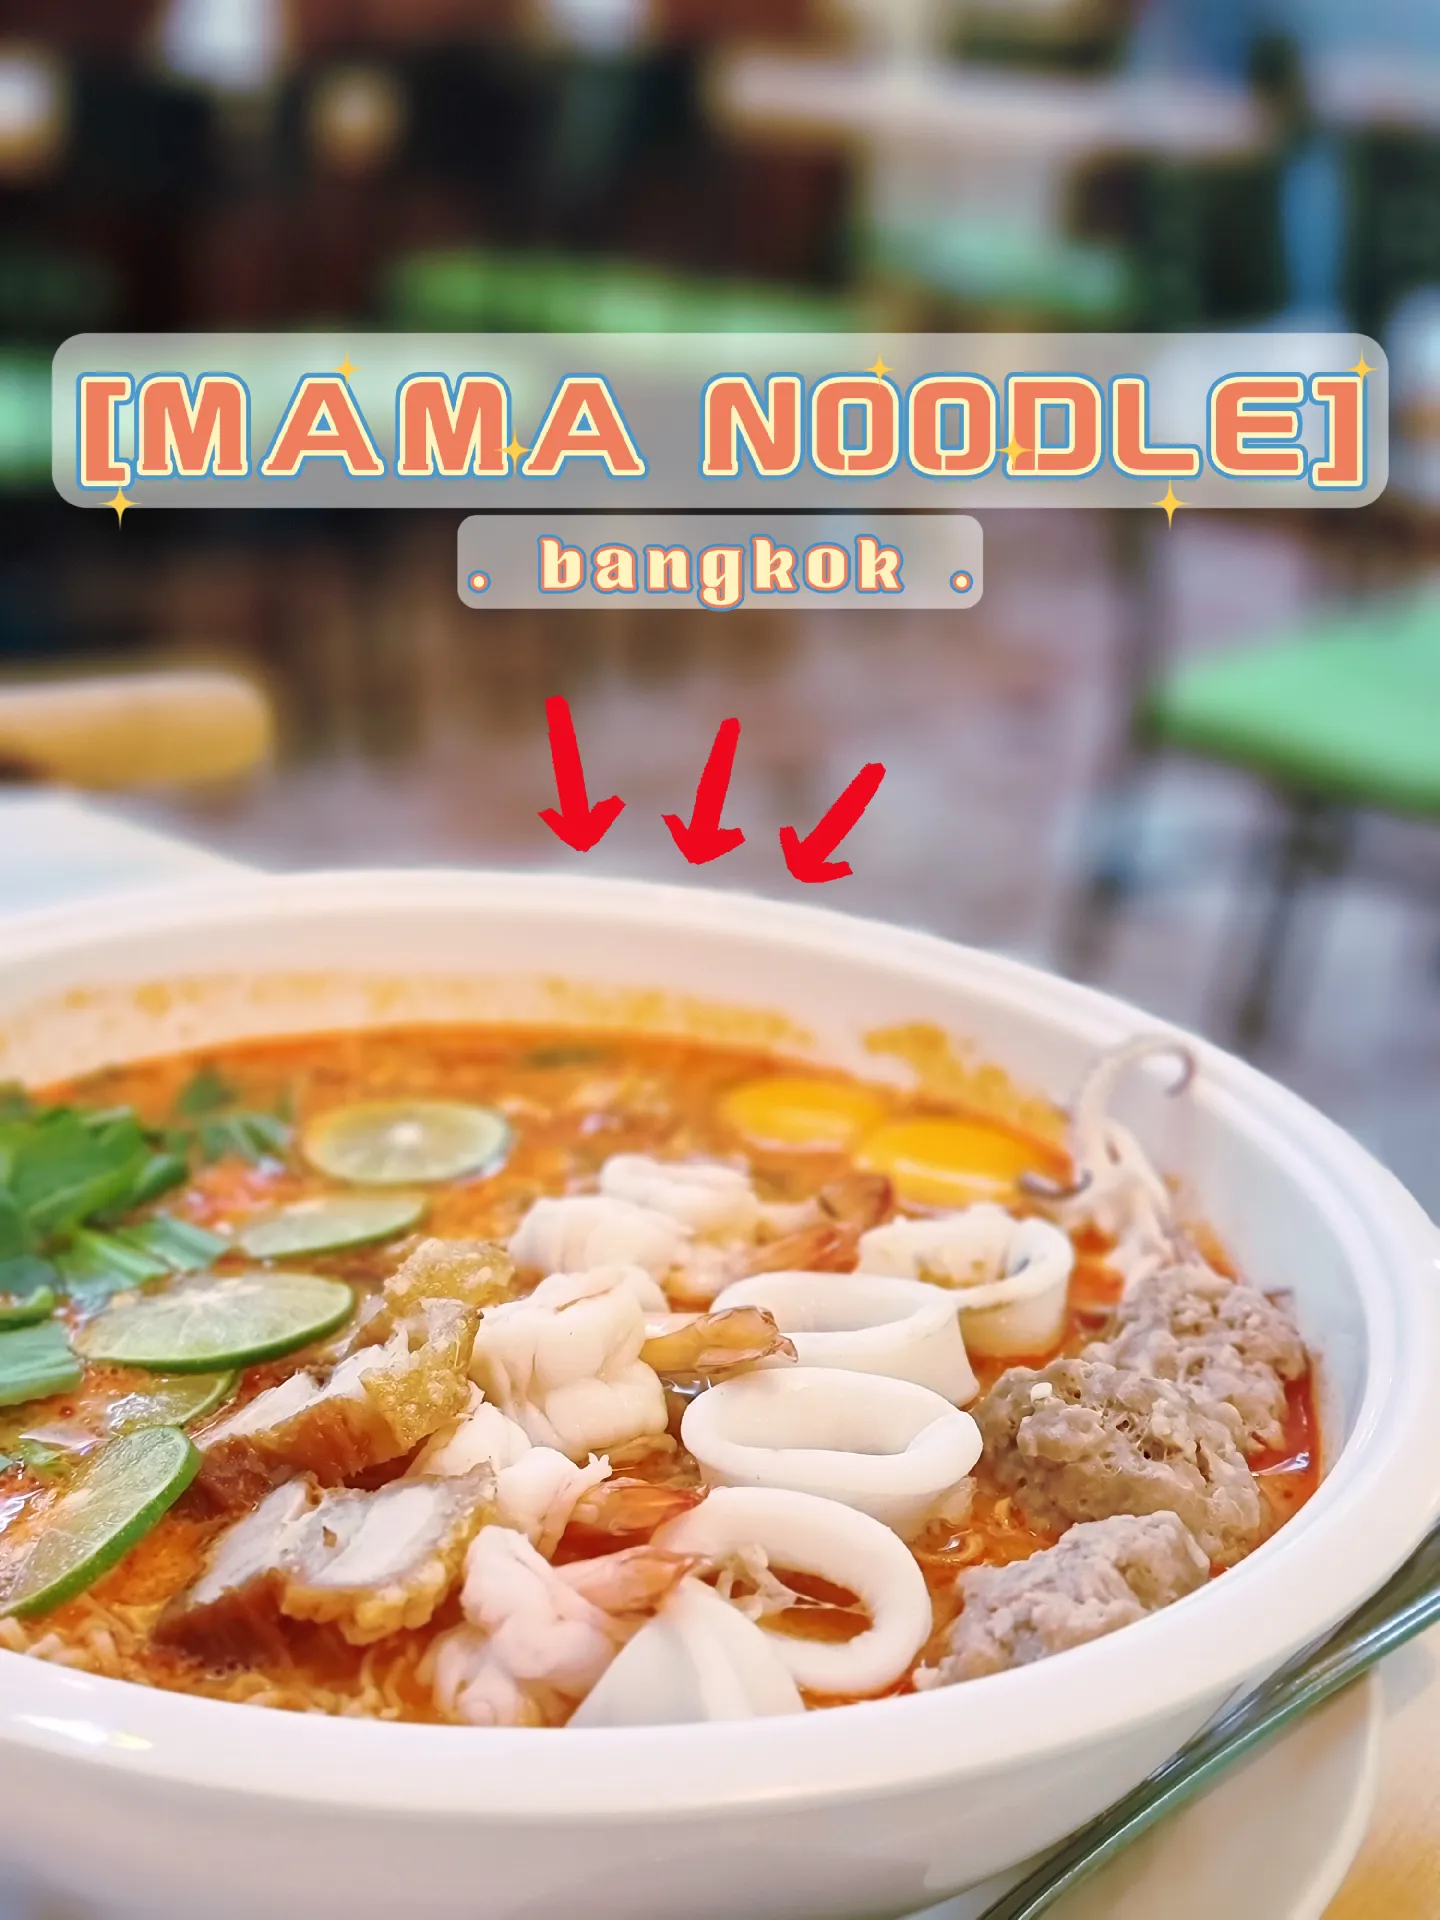 Mama' noodles to cost more from May: source